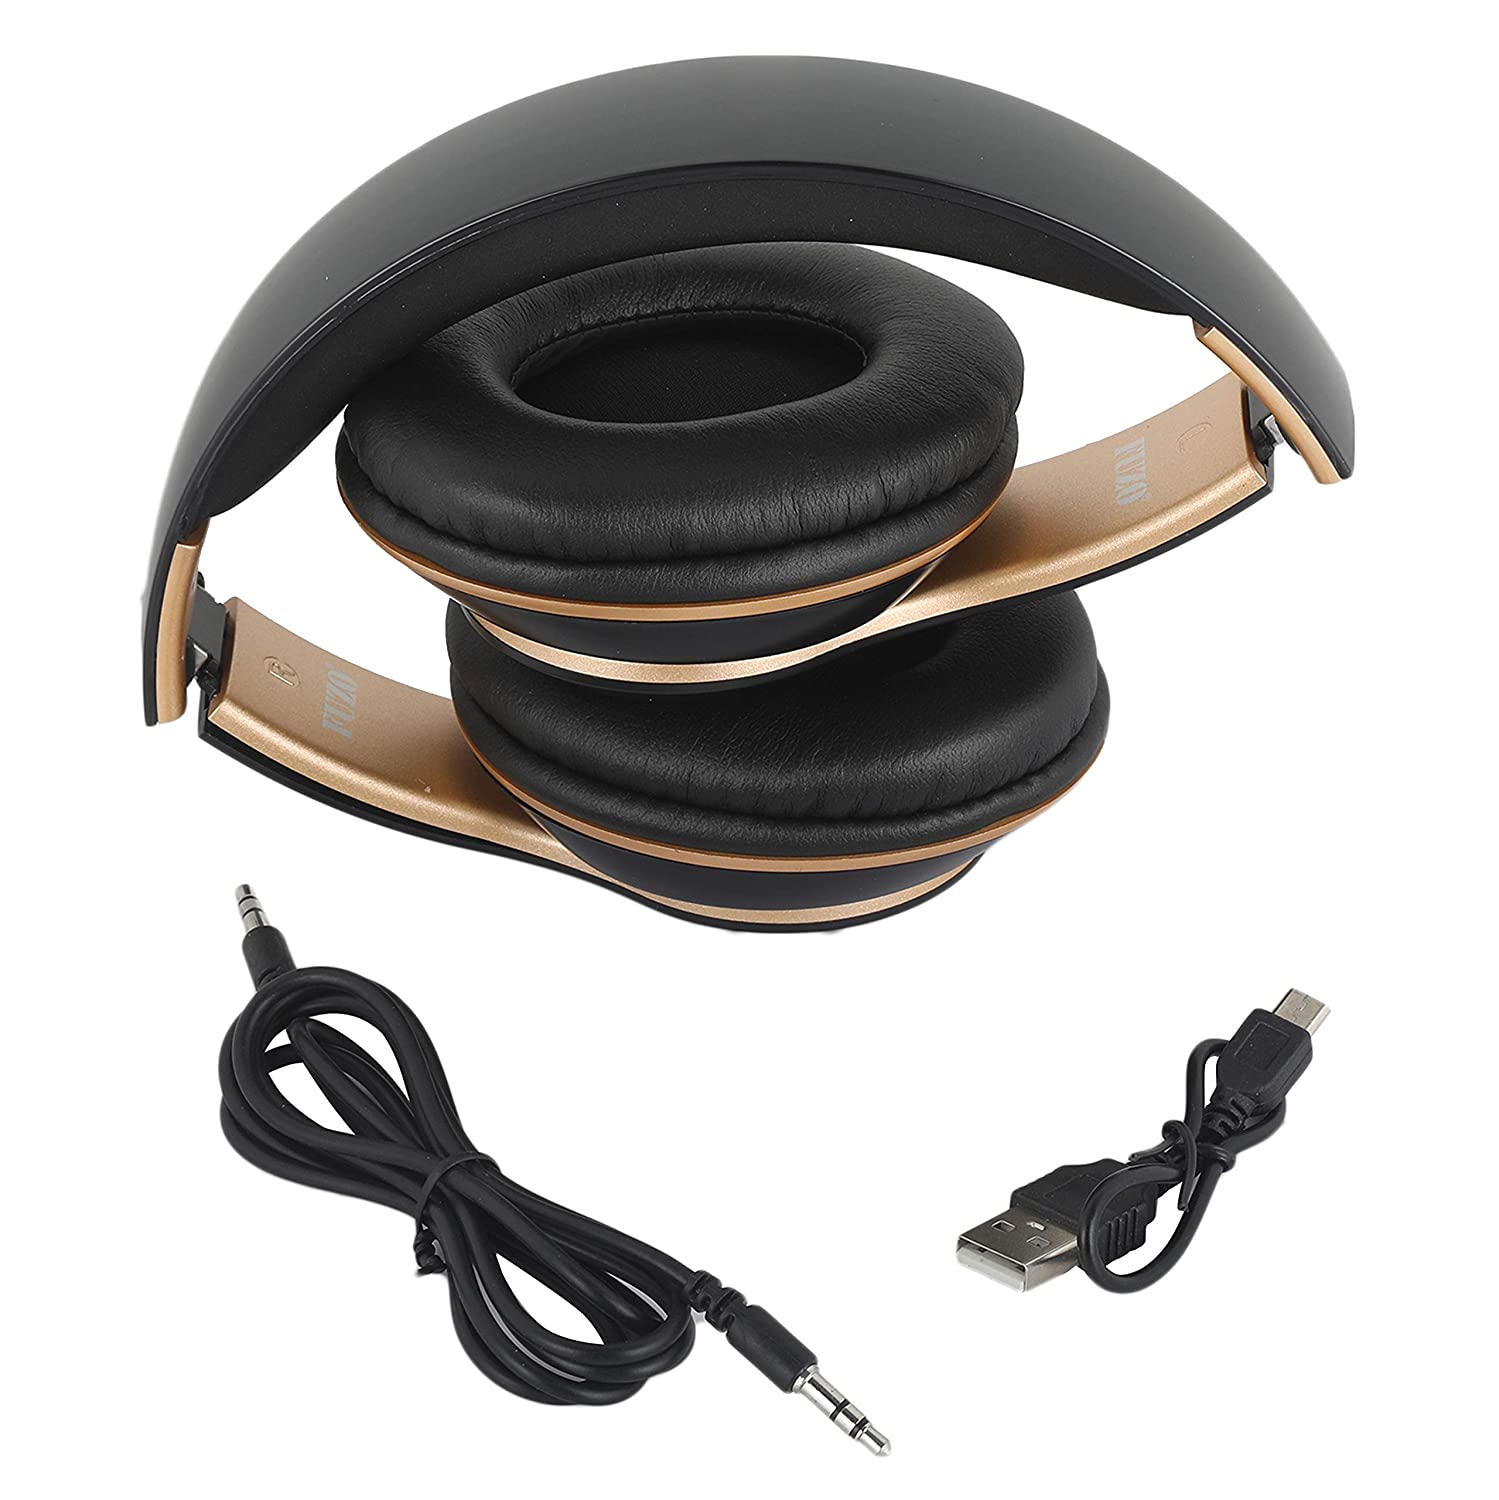 FUZO Jive Wireless Bluetooth Headphones with True Noise Isolation for High Fidelity Sound, 35 mW Audio Driver, Up to 3 to 4 Hours of Play-Time & Integrated Controls with in-Built mic - Black/Gold